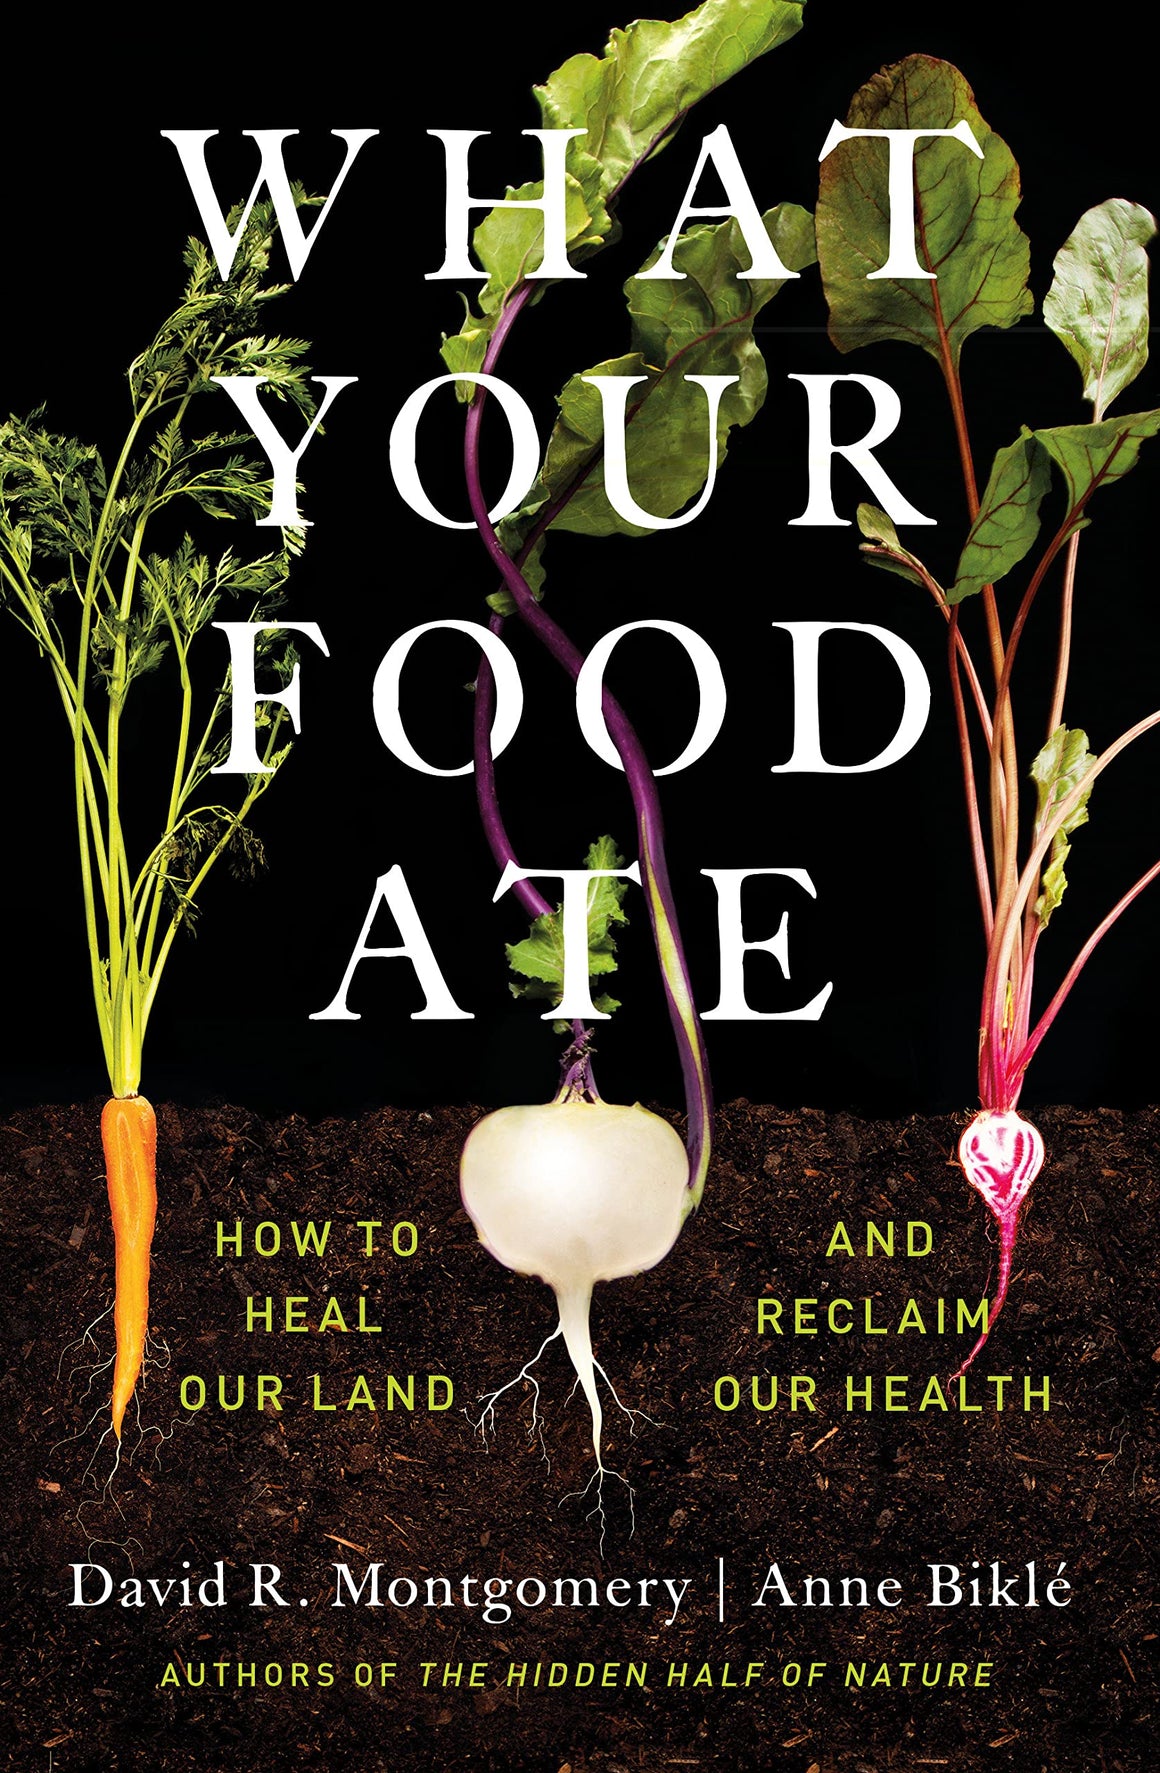 What Your Food Ate: How to Heal Our Land and Reclaim Our Health (David R. Montgomery, Anne Biklé)